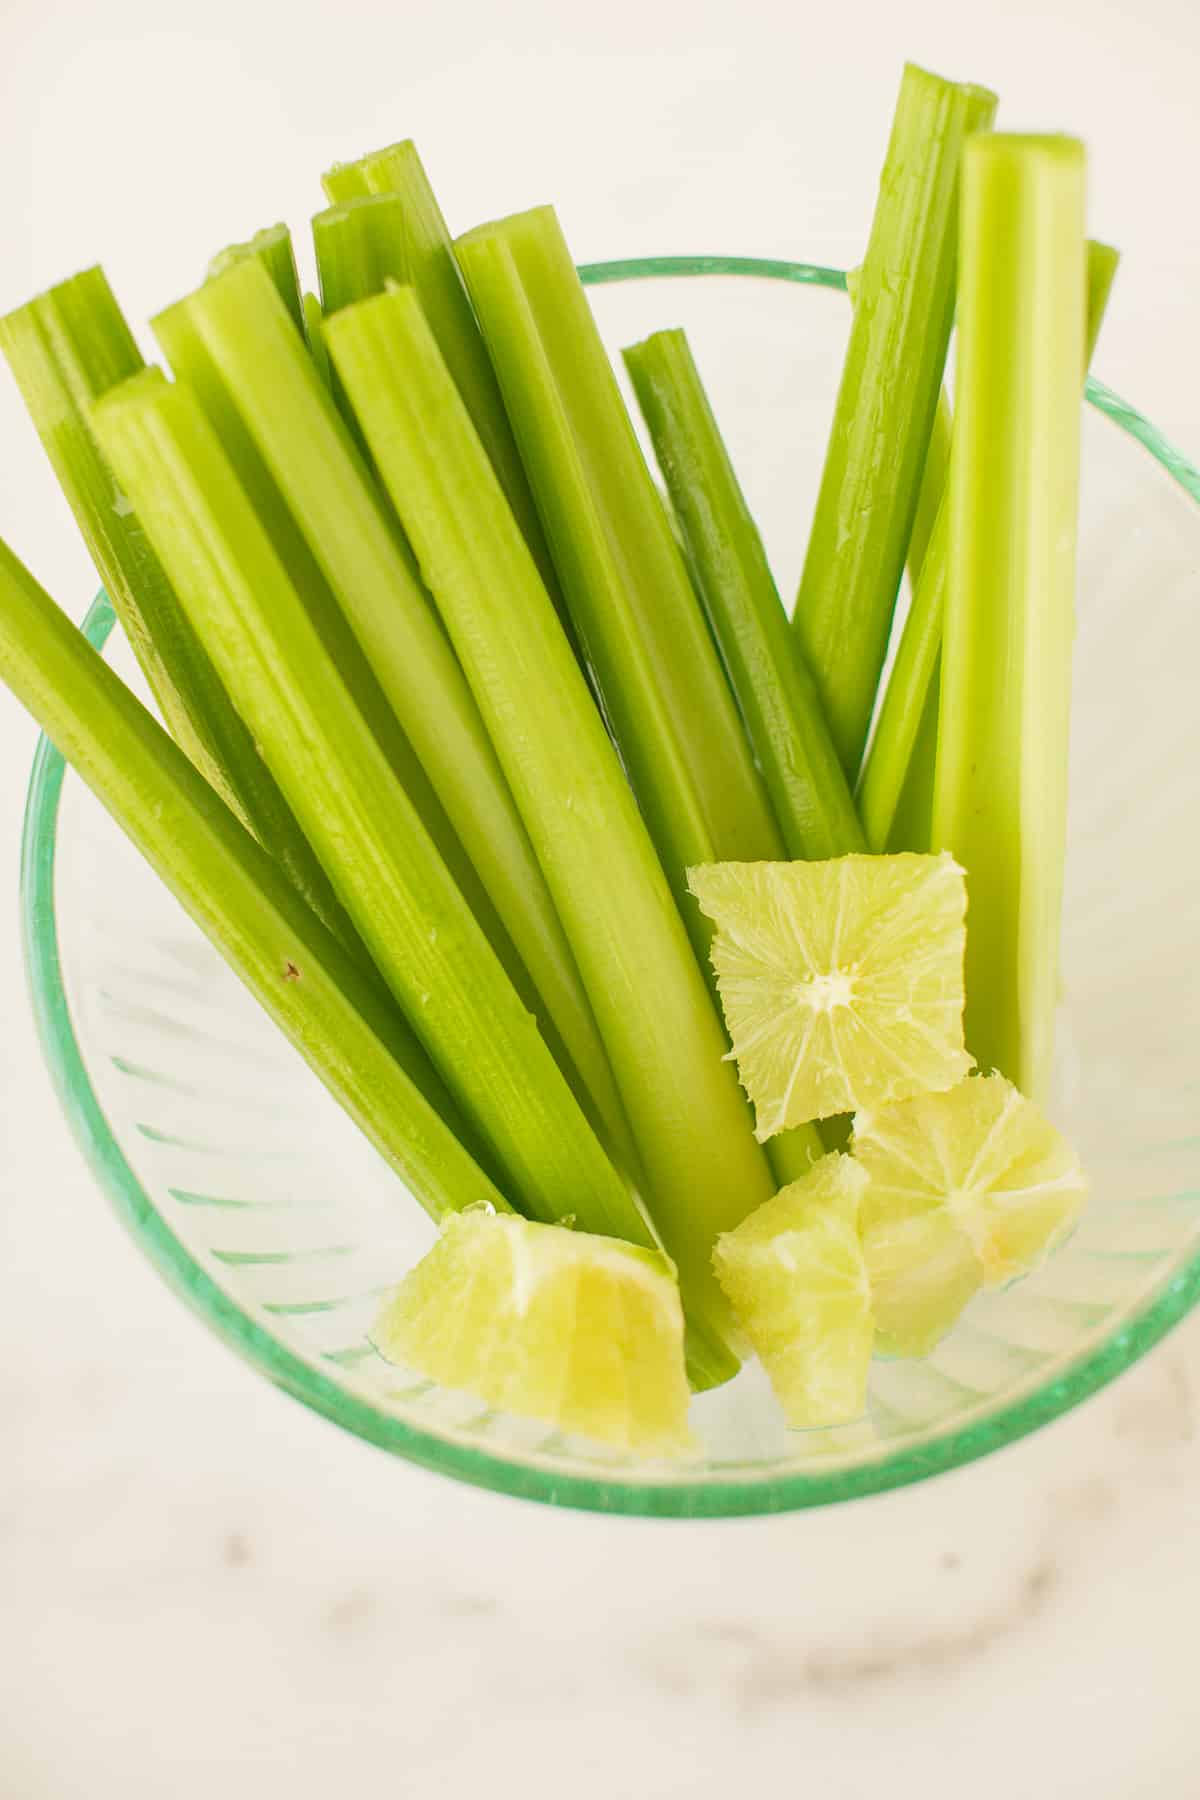 celery stalks and peeled limes in a bowl.